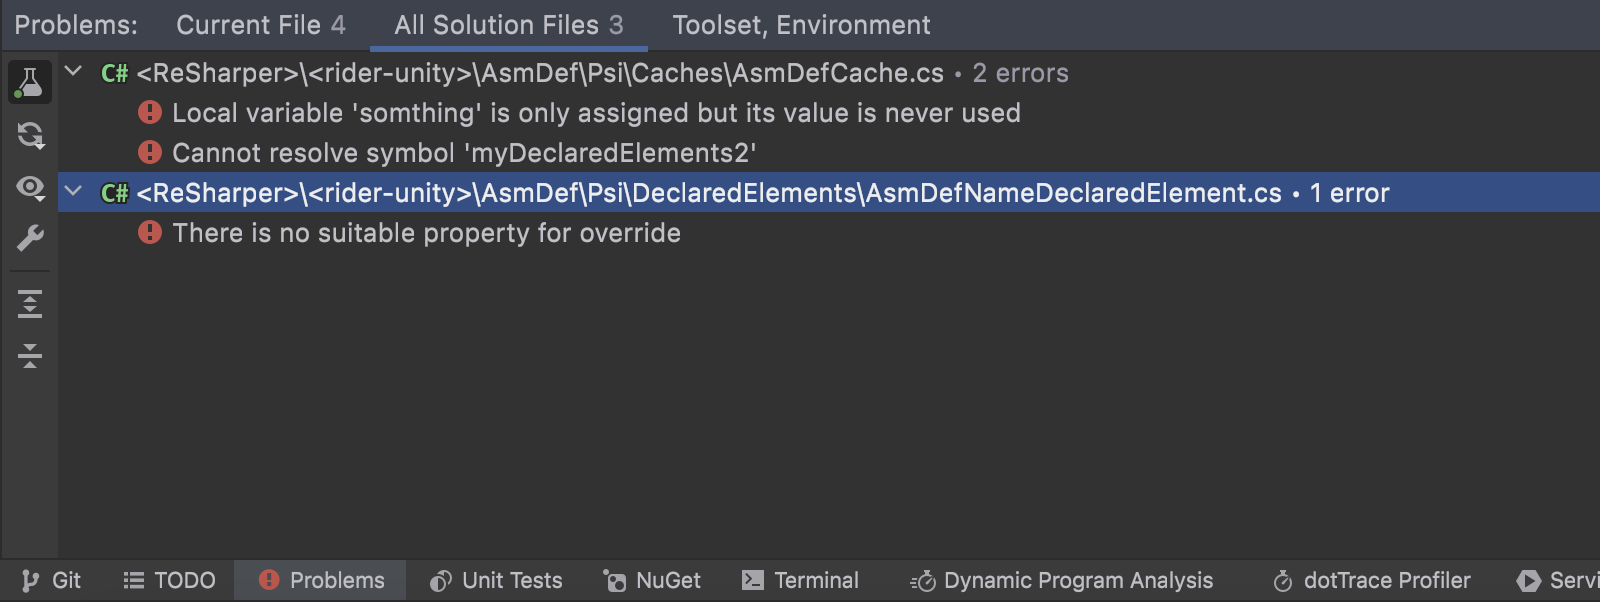 All solution files tab